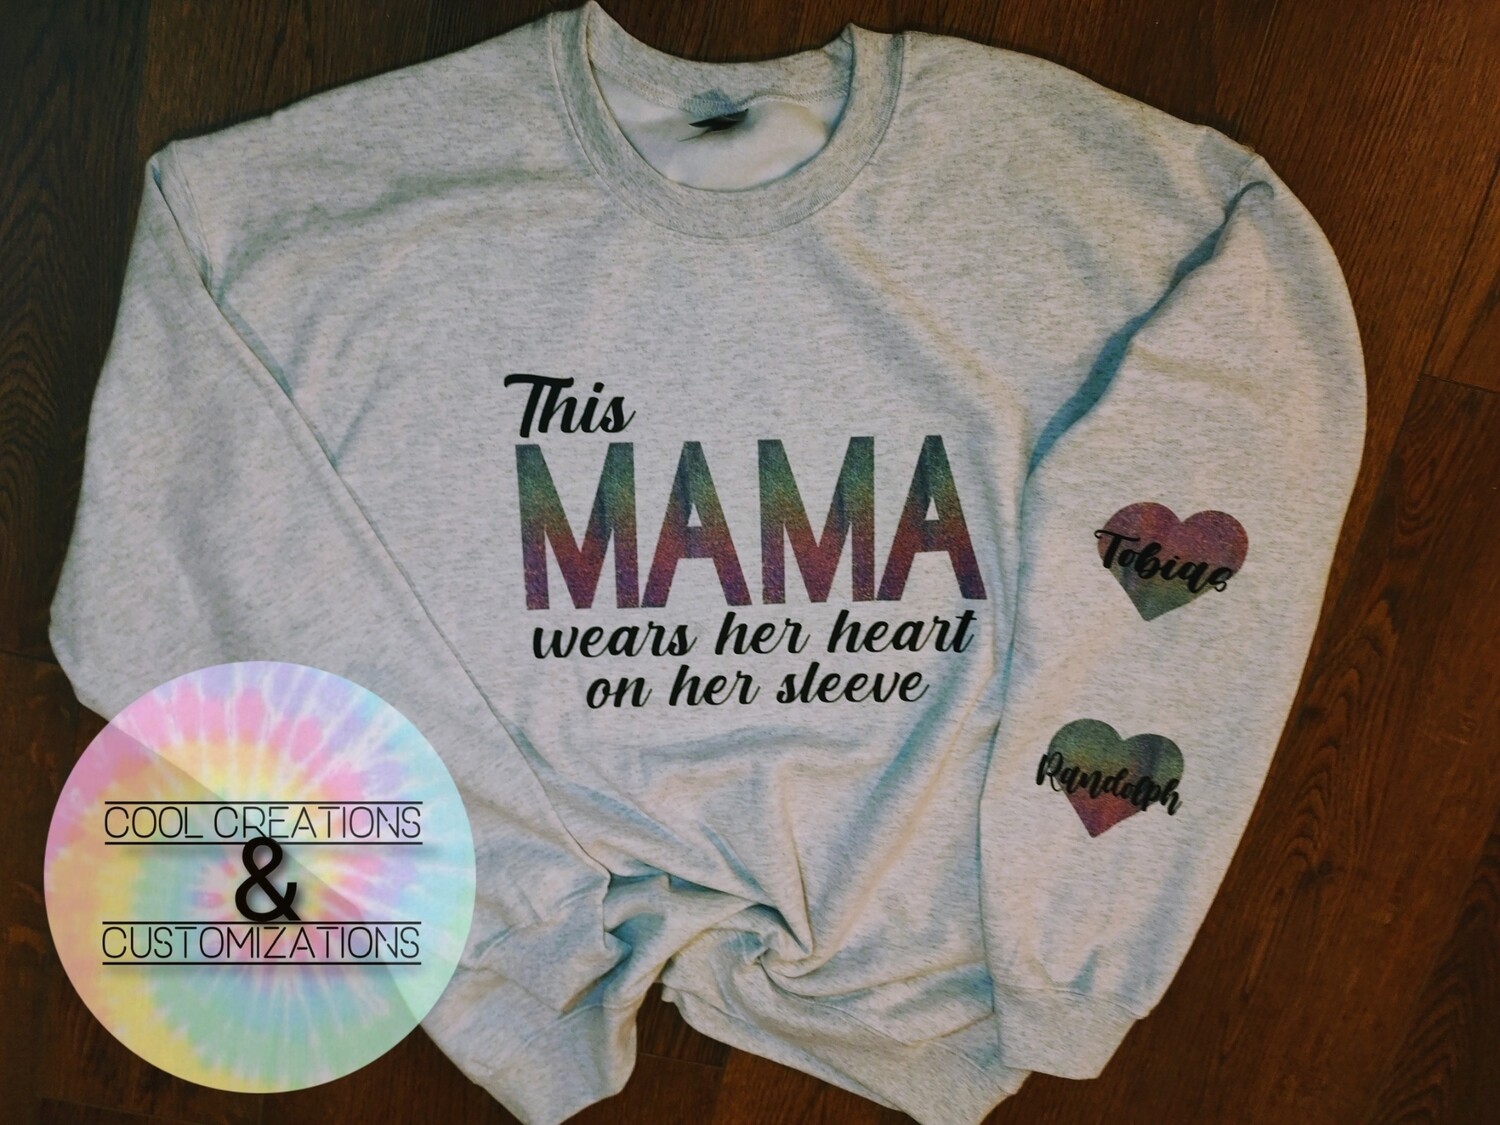 "This mama wears her heart on her sleeve" crewneck